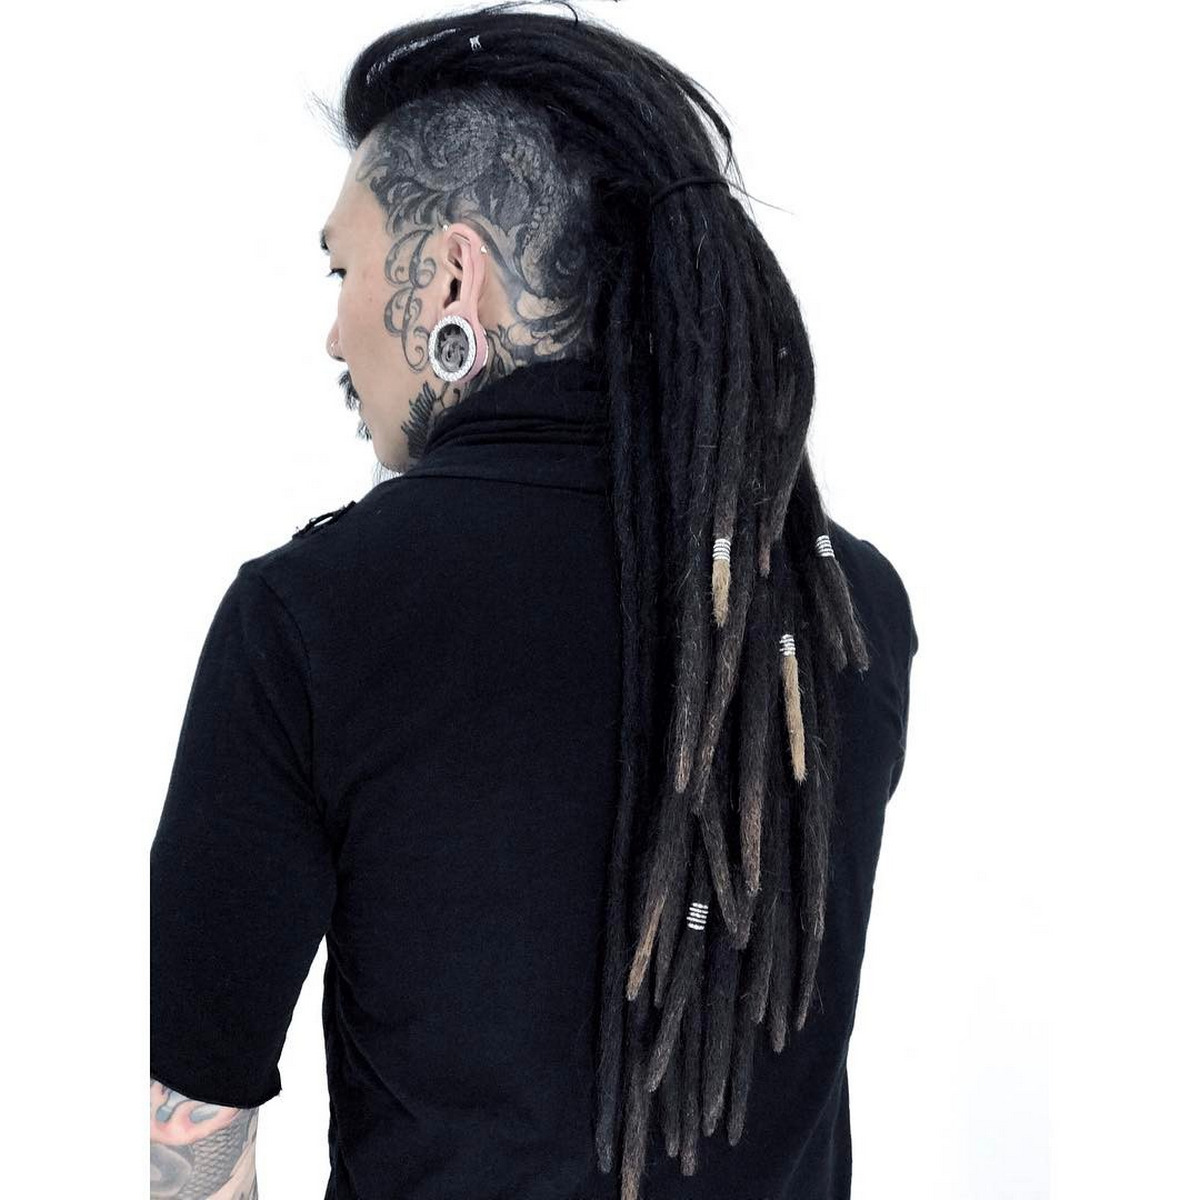 Braided Dreads with Exposed Sides